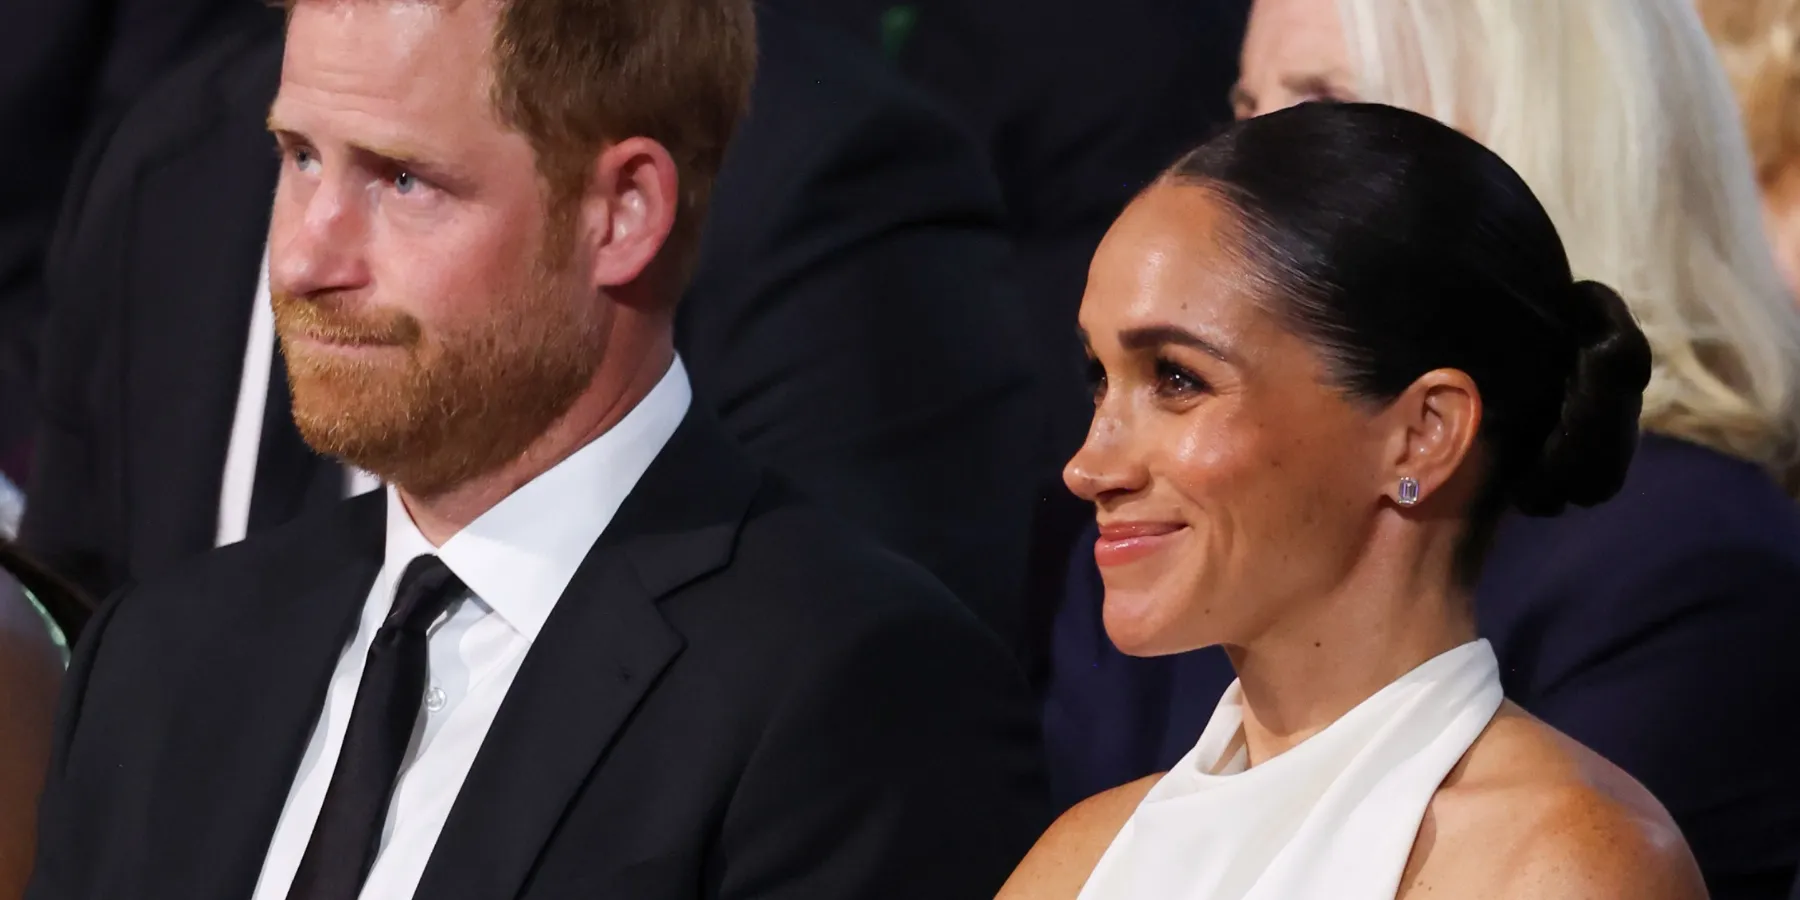 Prince Harry and Meghan Markle have been together many lifetimes says an astrologer.